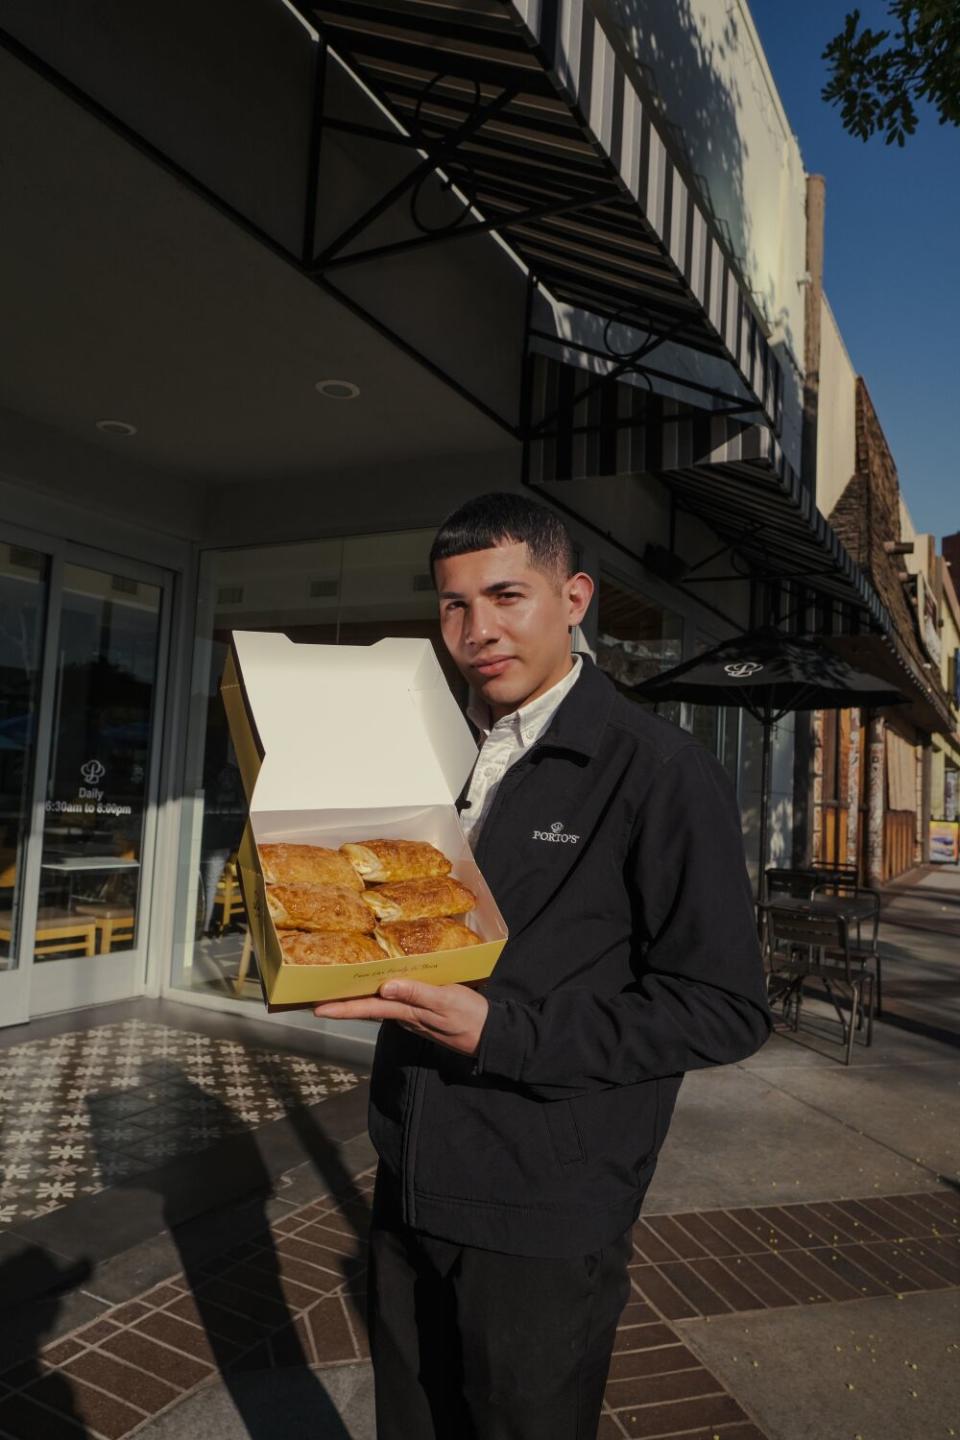 A man stands outside Porto's, holding open a to-go box of pastries.